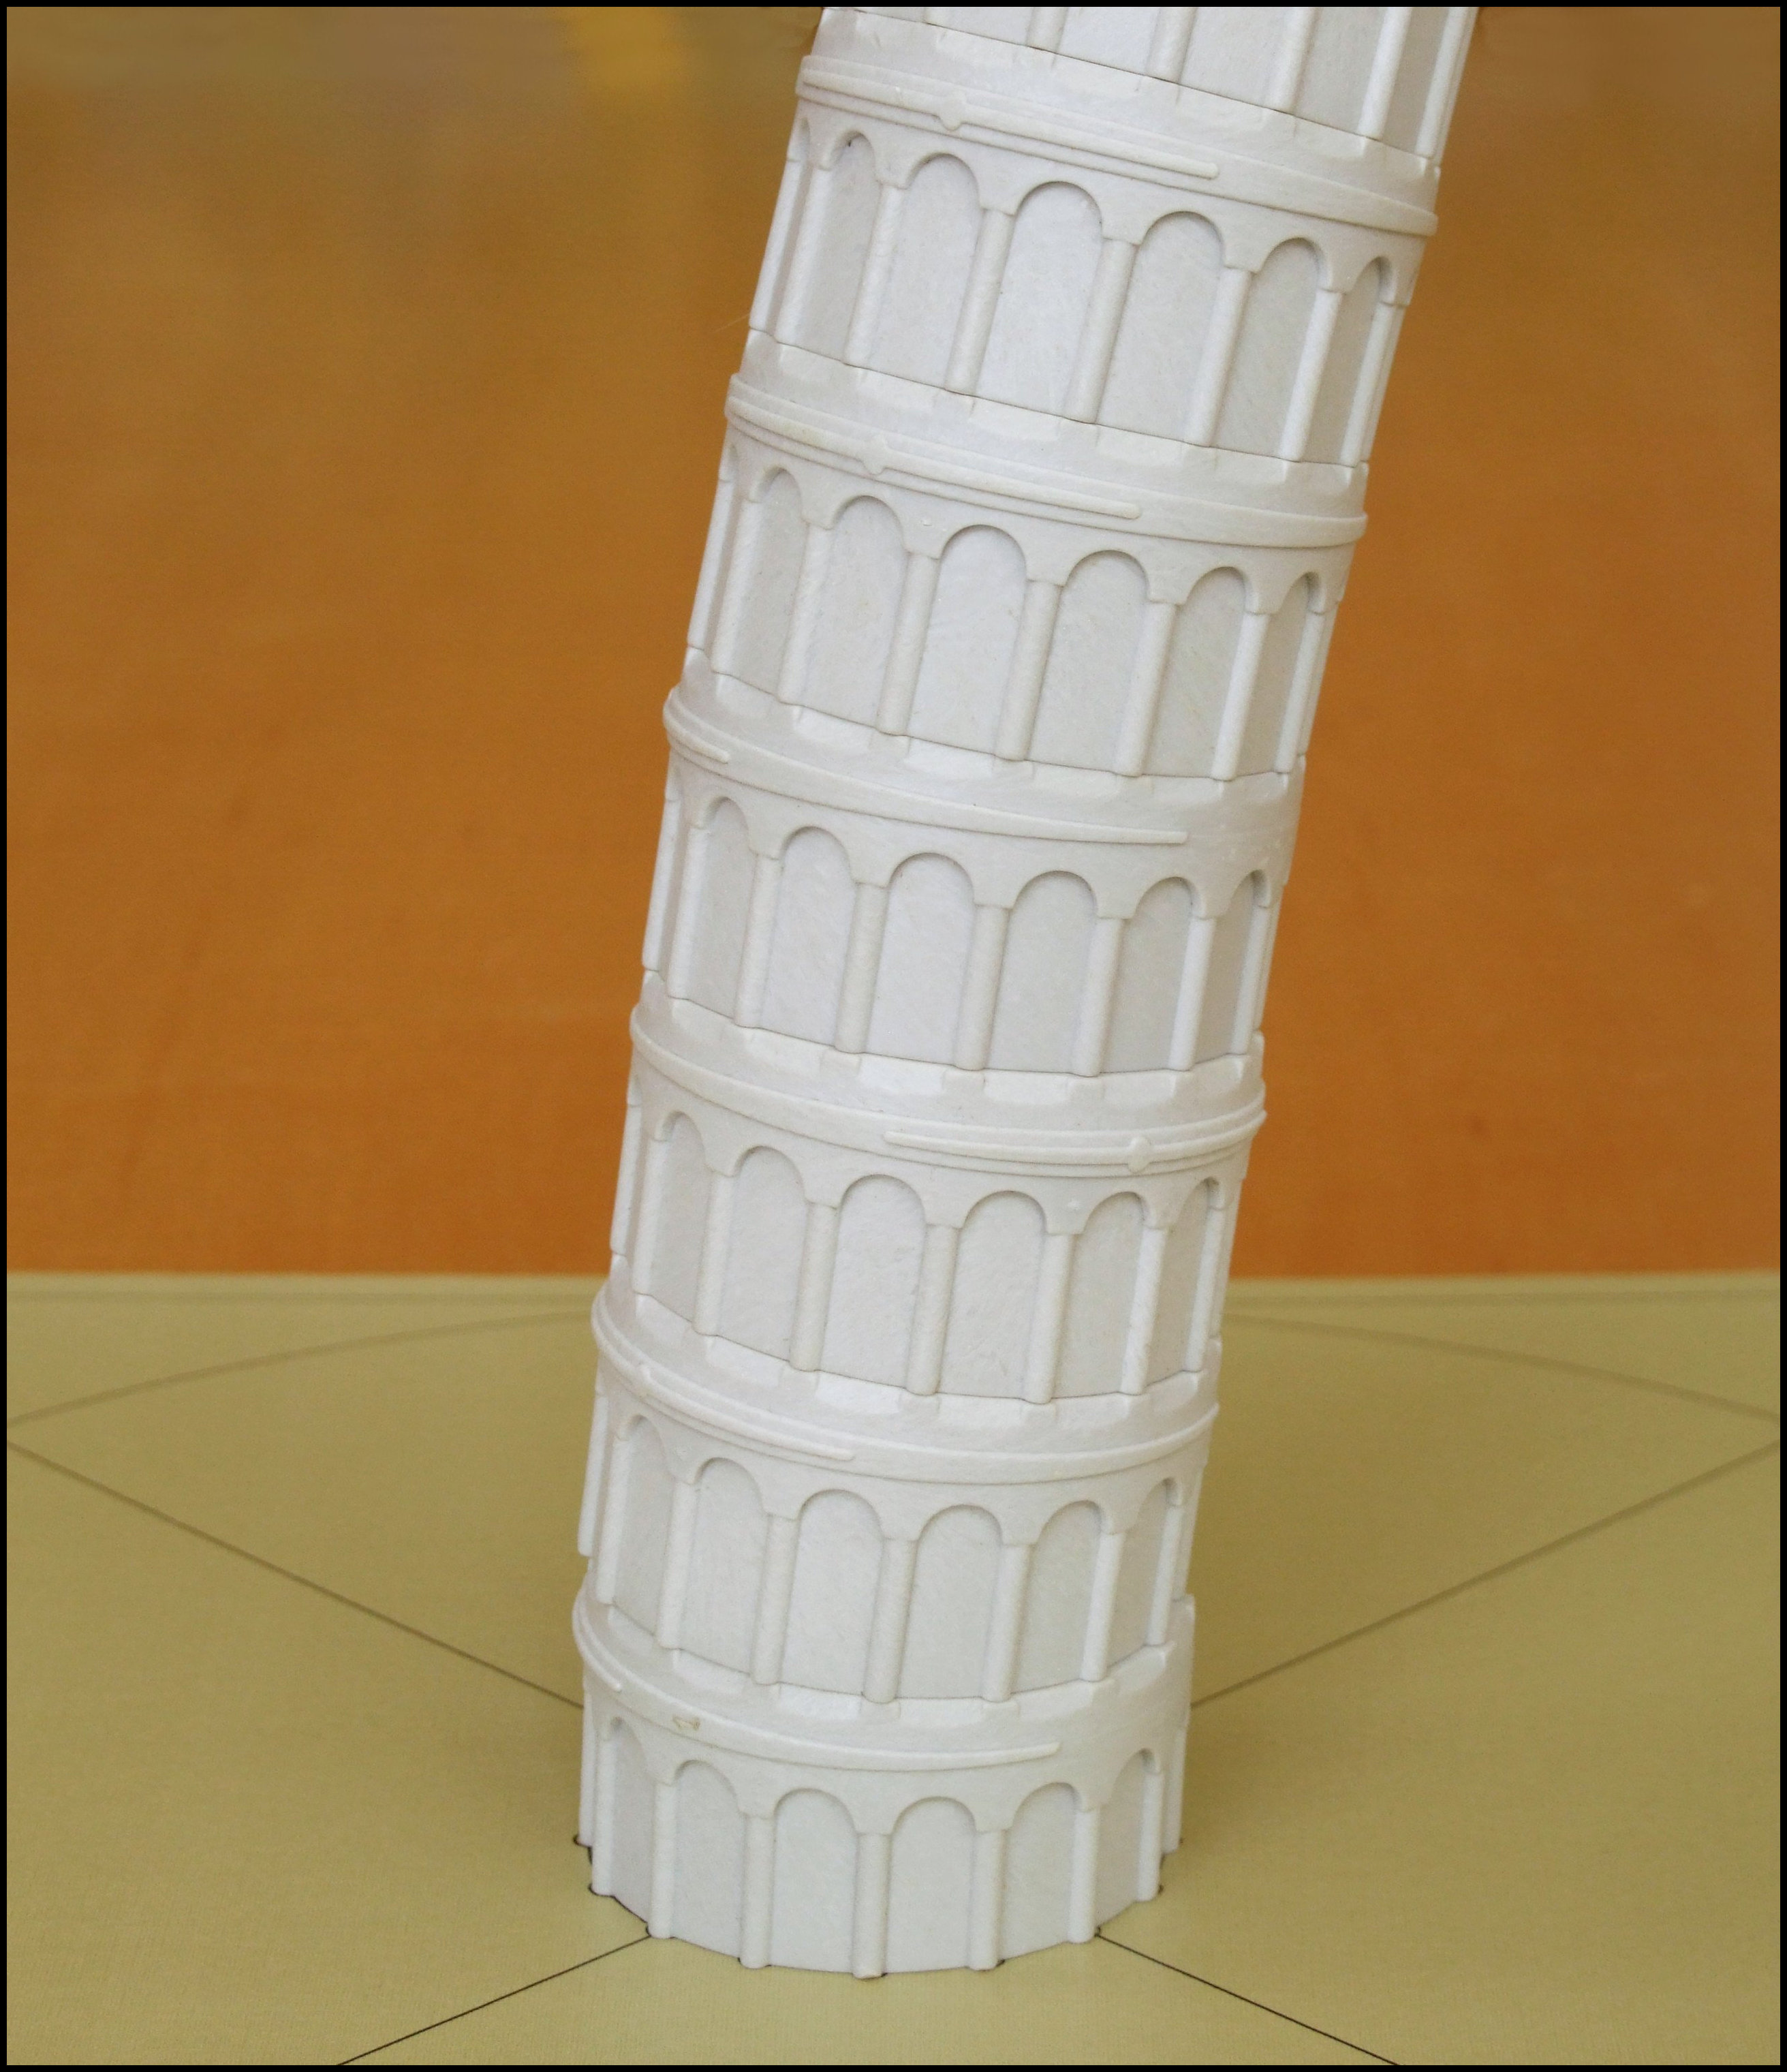 Pisa - A Leaning Tower